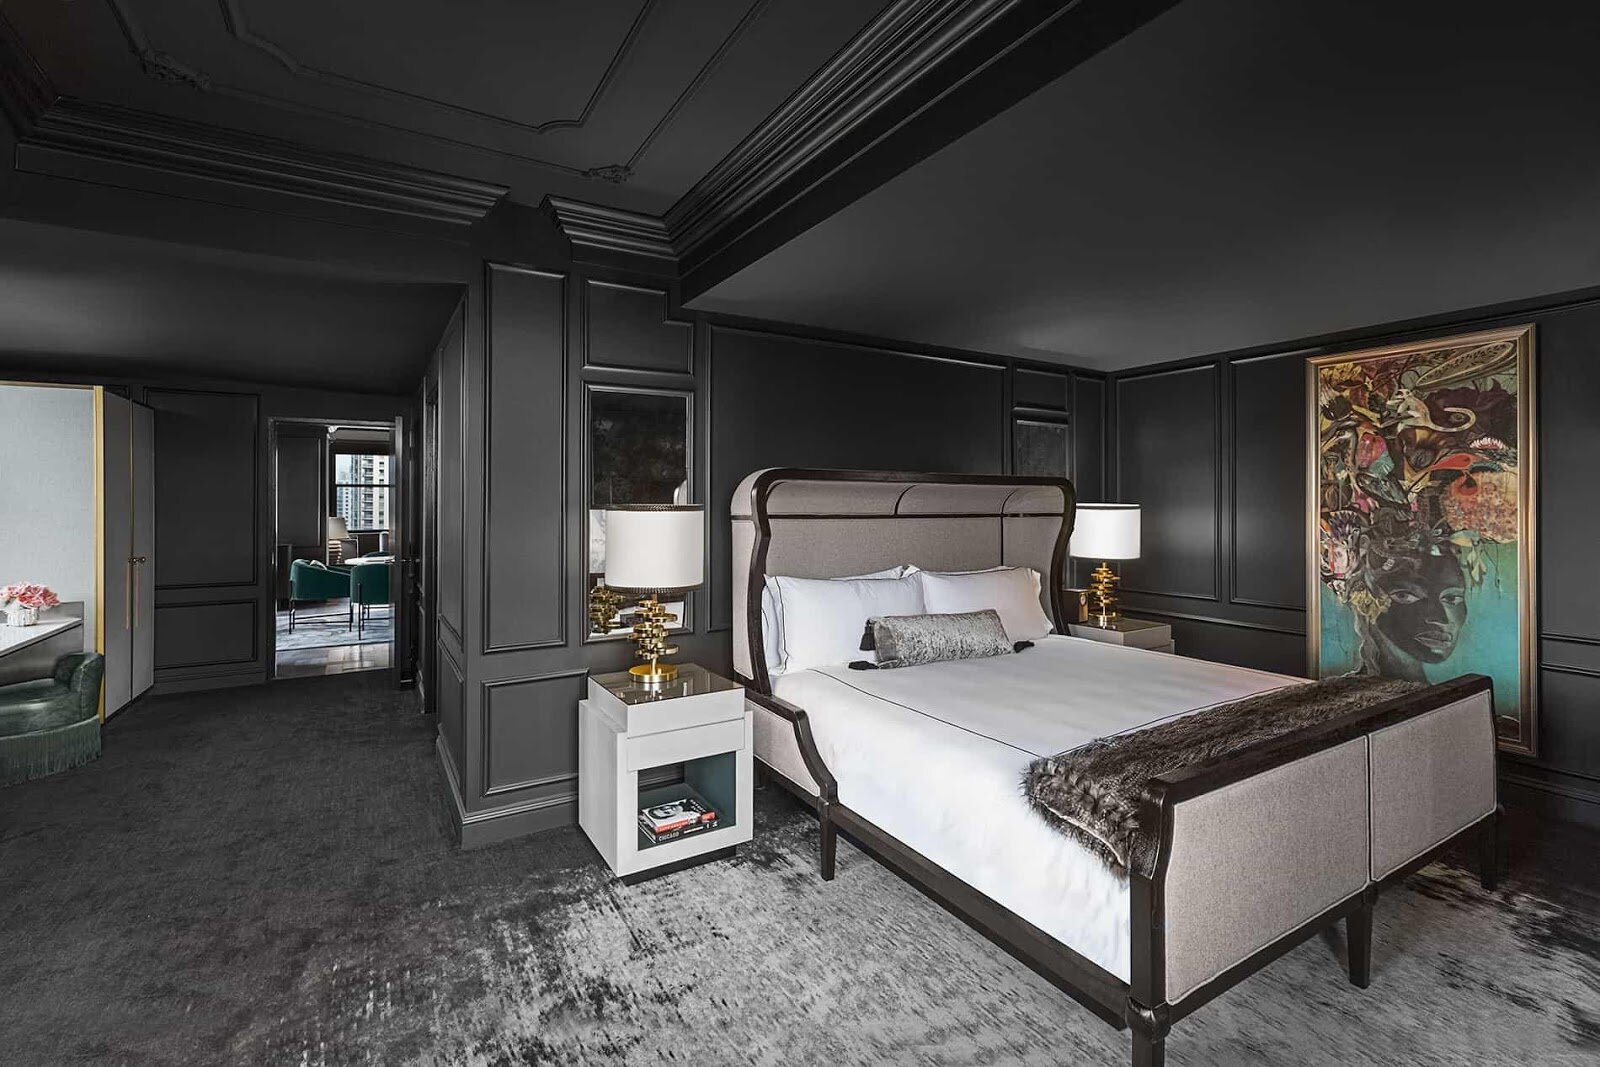 An Interview With Chicago’s Top Luxury Boutique Hotel: St. Jane Hotel